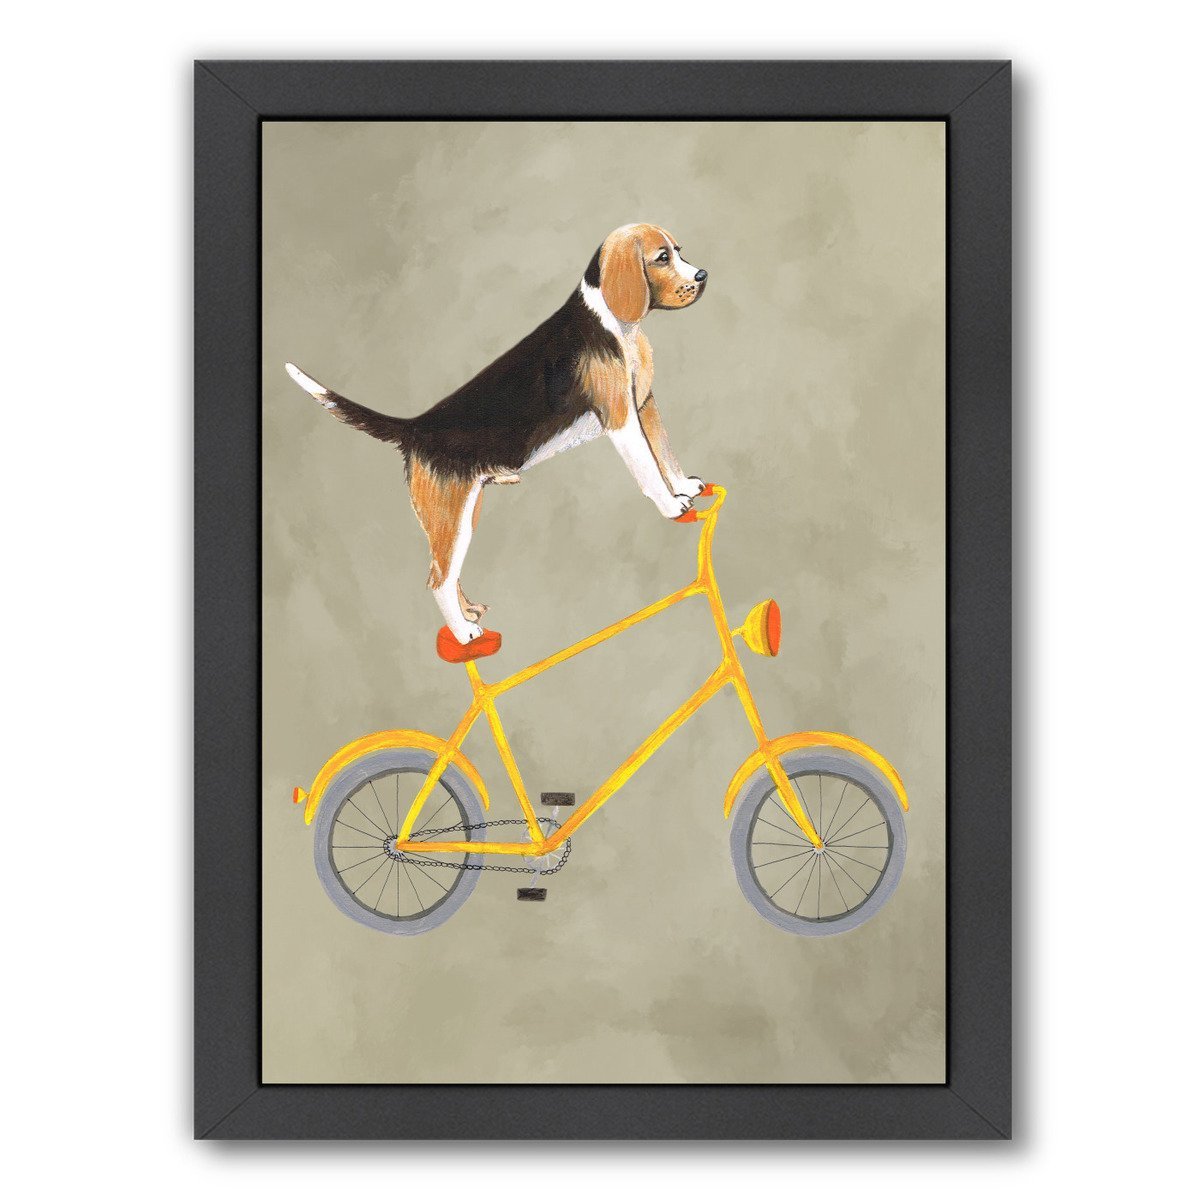 Beagle On Bicycle By Coco De Paris - Black Framed Print - Wall Art - Americanflat